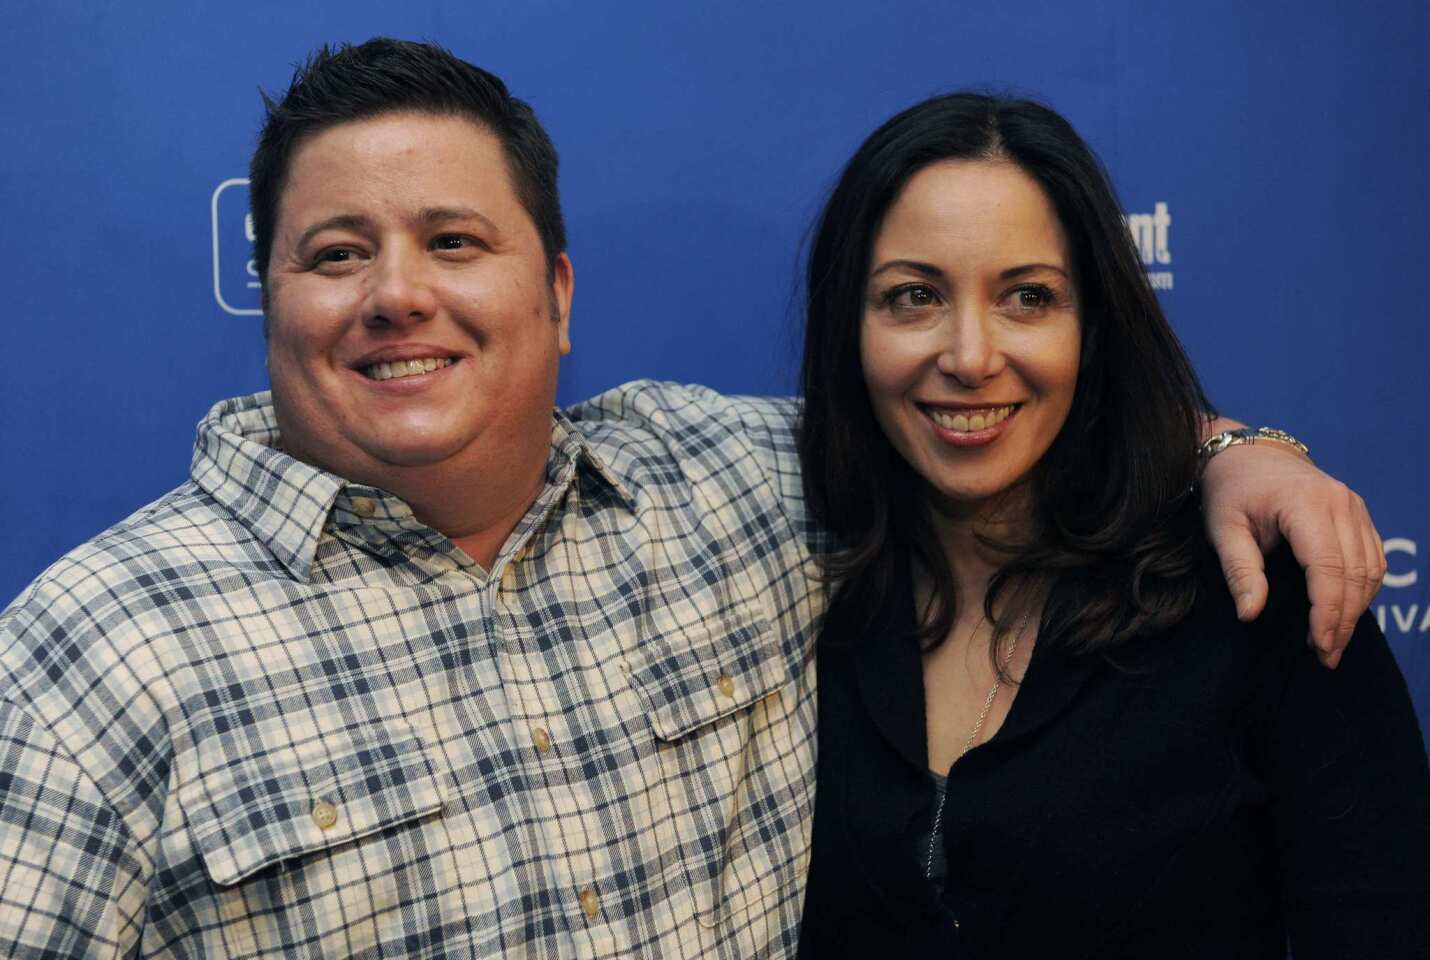 Oh, and Chaz Bono isn't tying the knot with Jennifer Elia